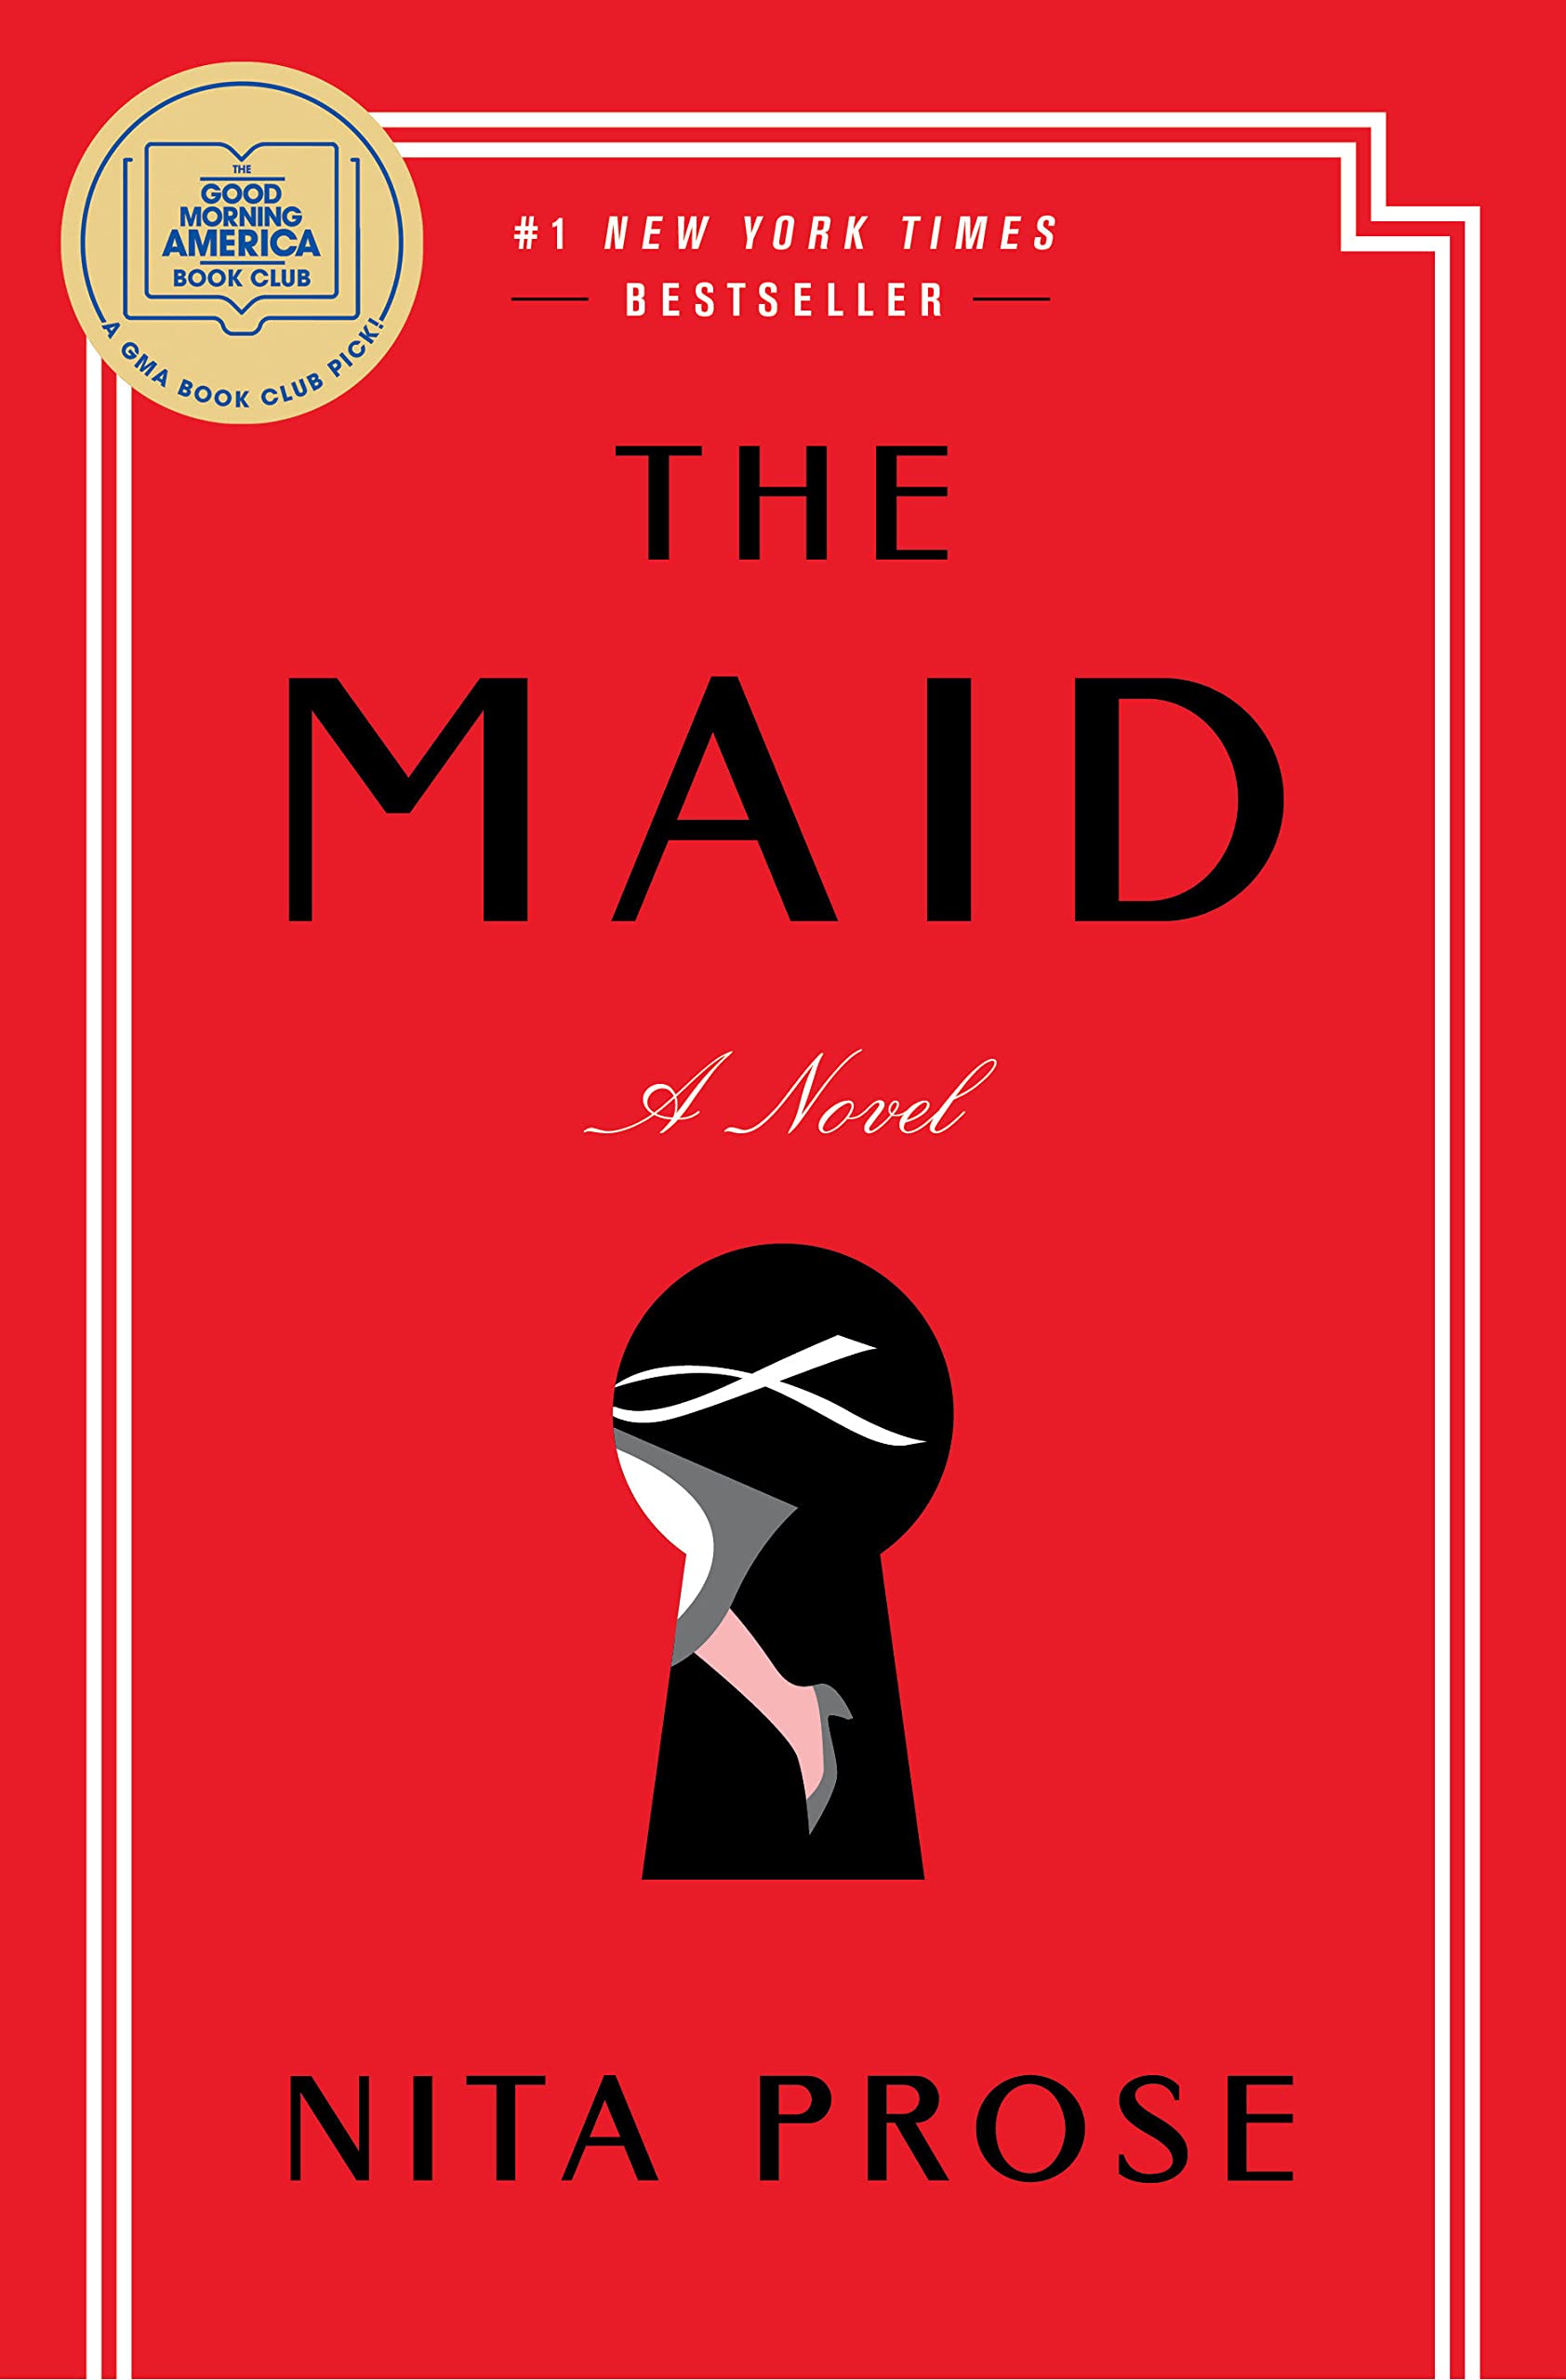 Image for "The Maid: A Novel"